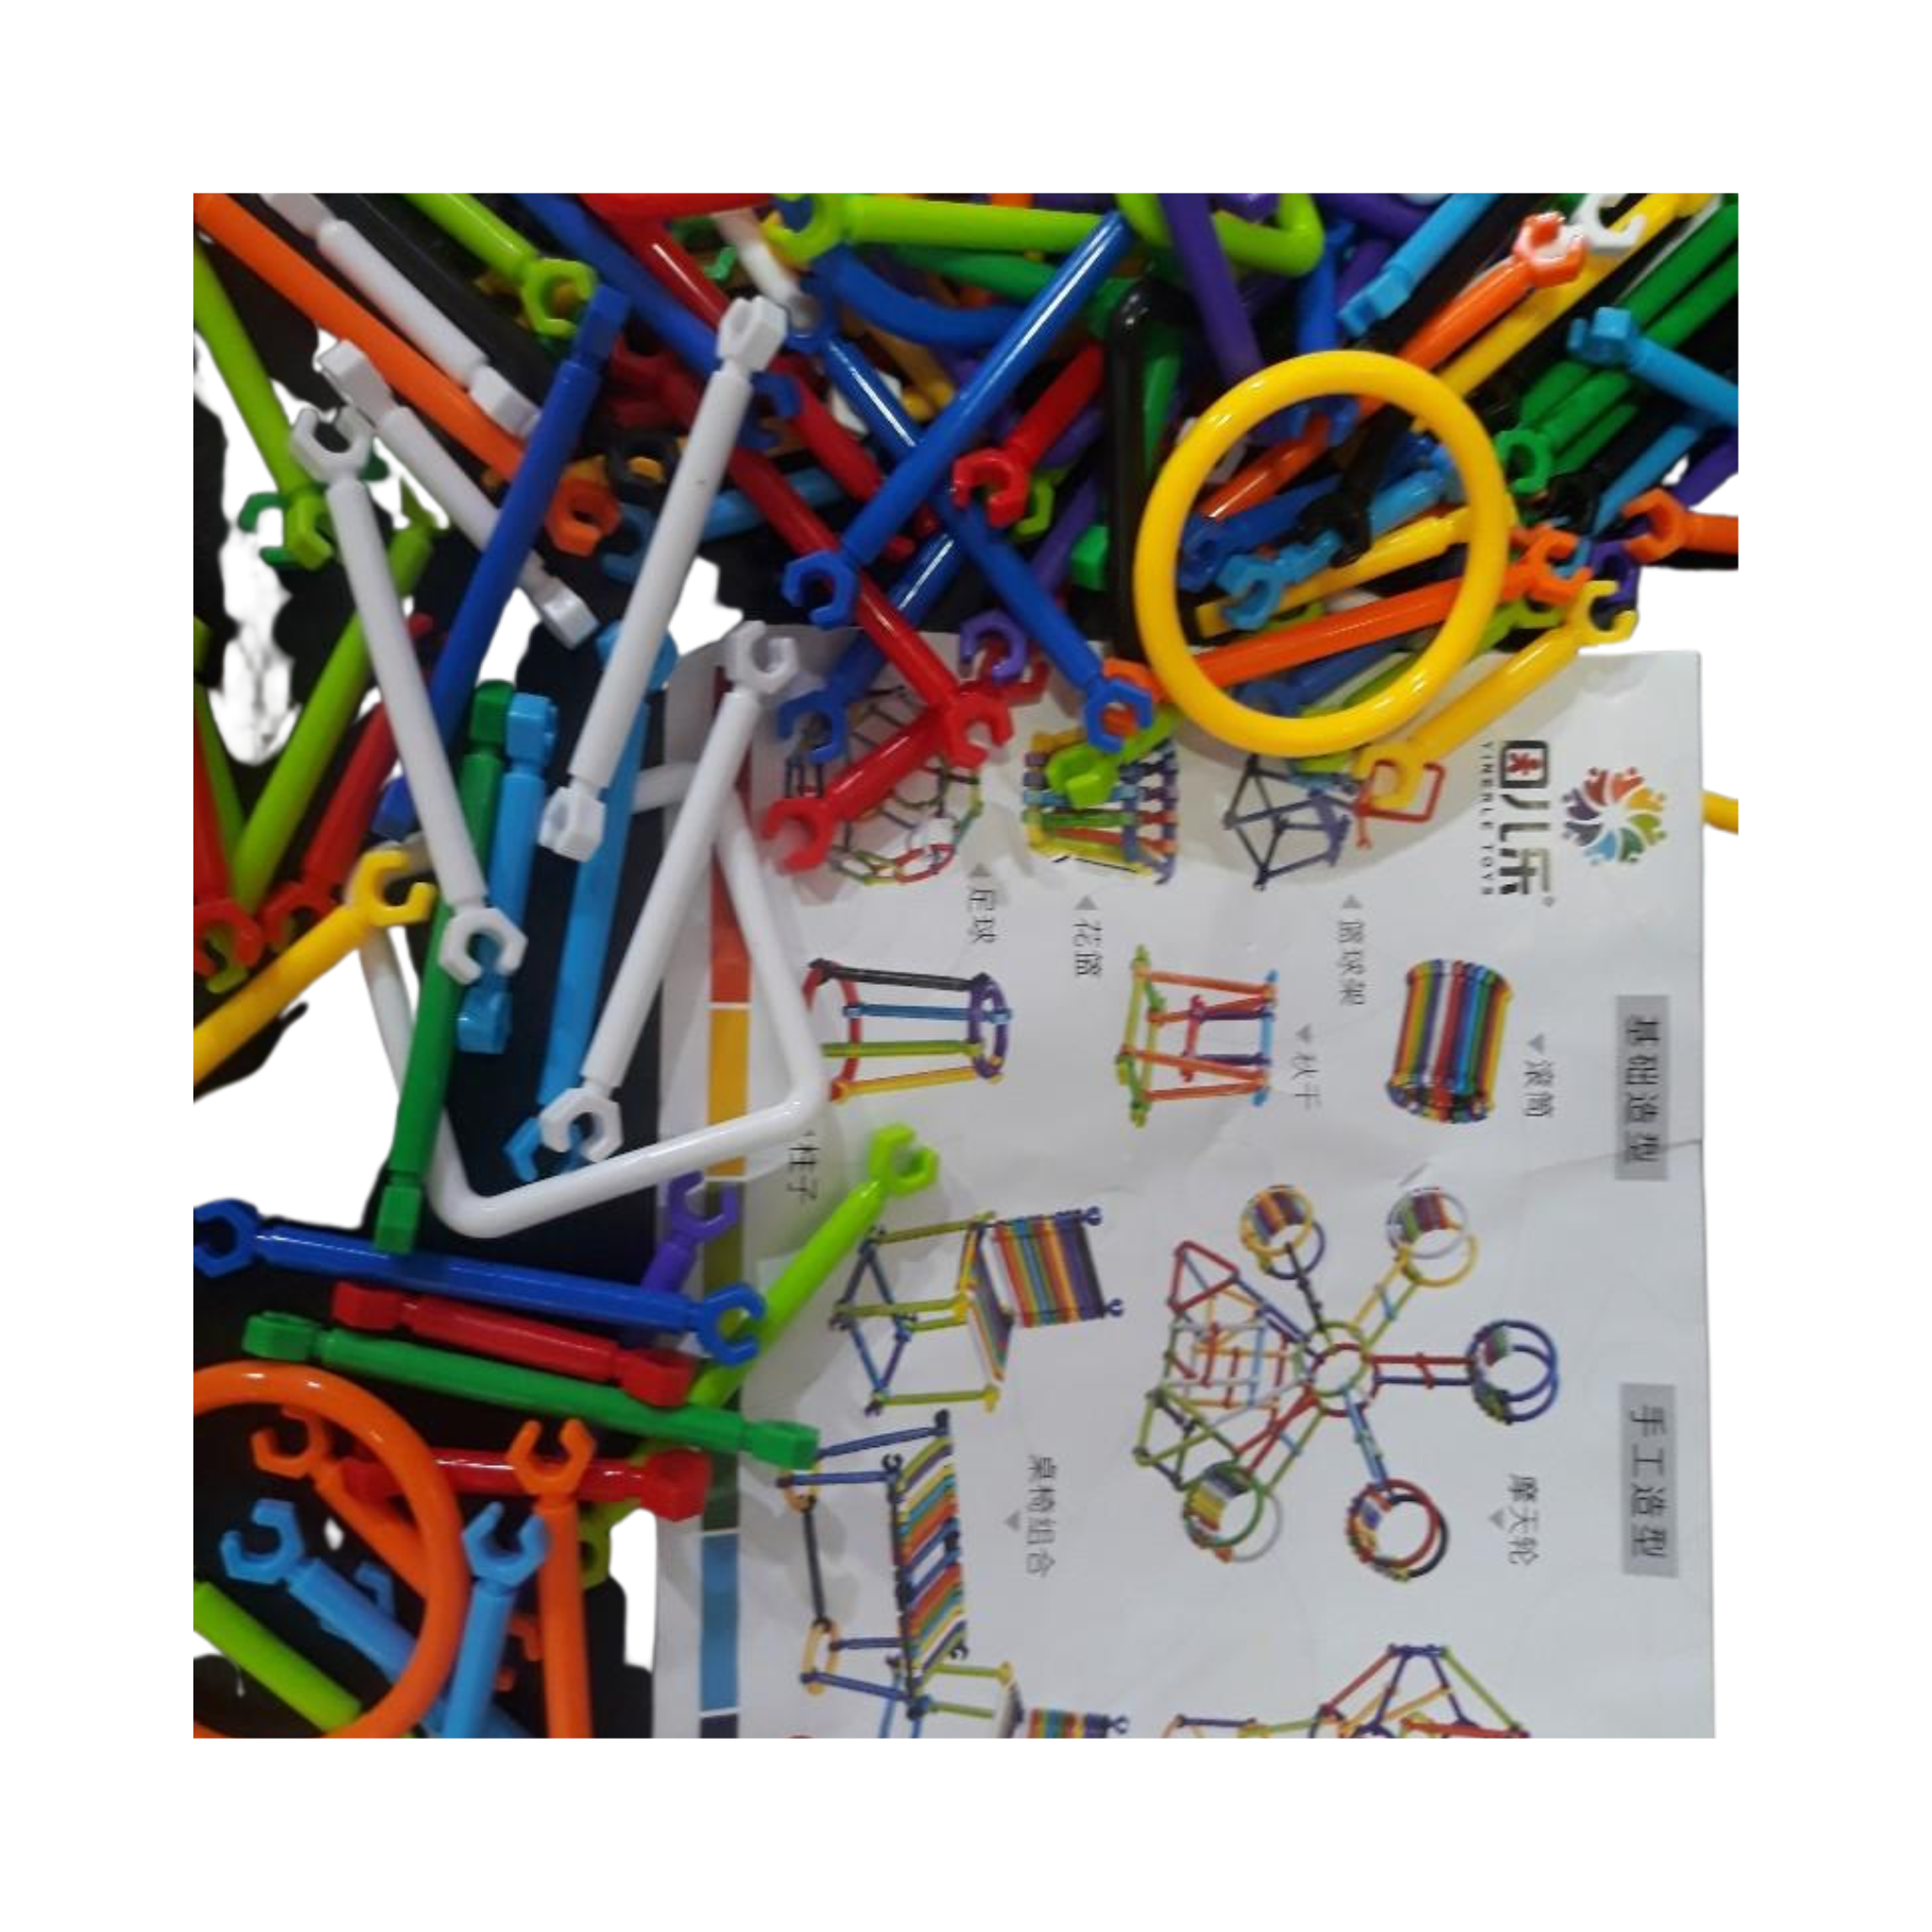 Stick Blocks, Puzzles, Pack 150-Piece, for Kids'